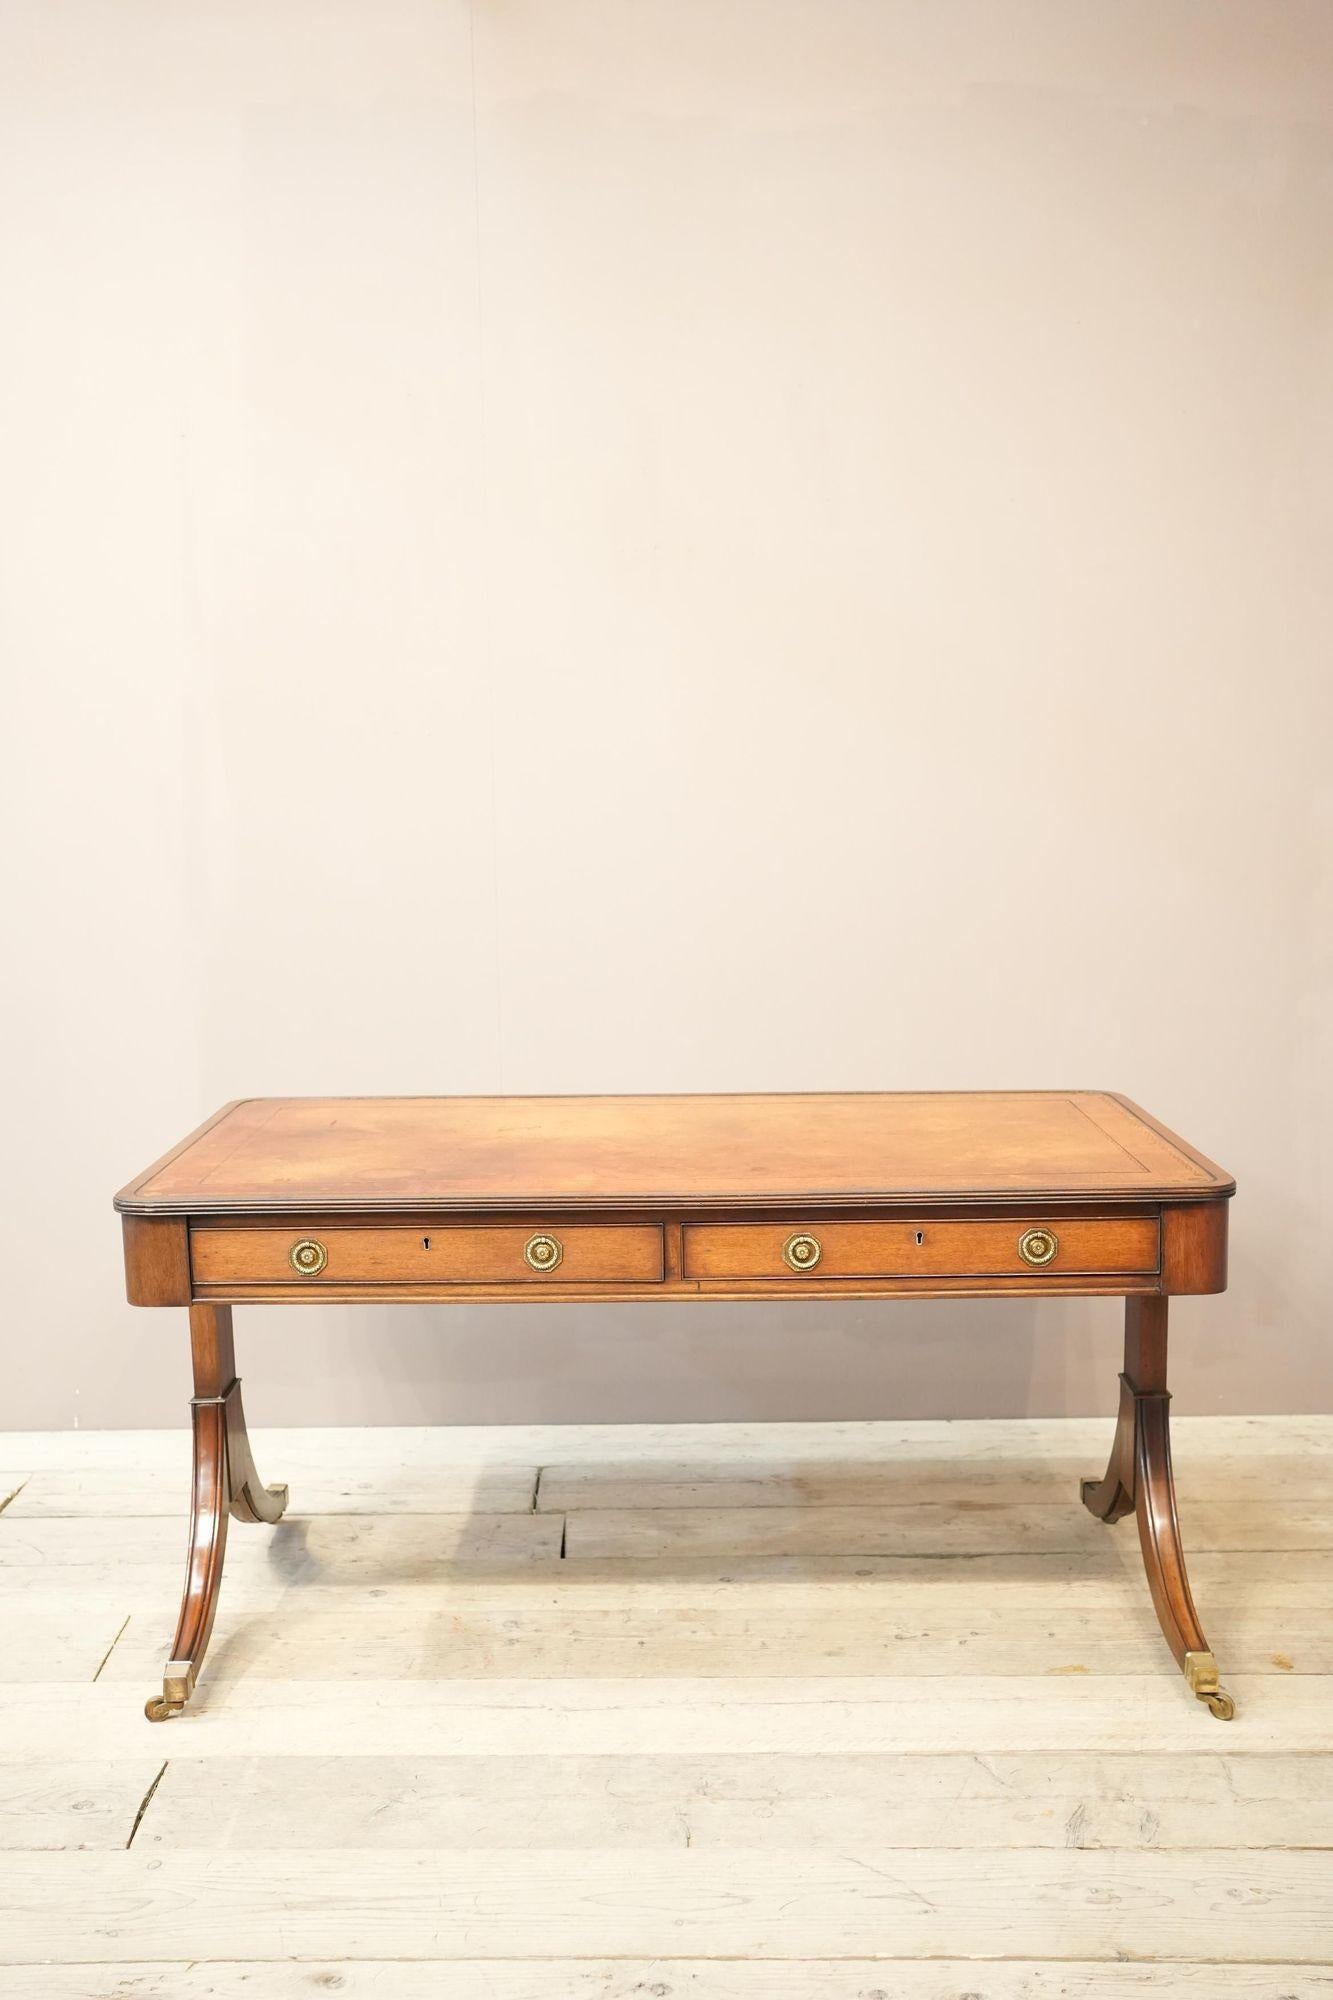 This is a very impressive large size Georgian style desk. It has an immaculate mahogany body with elegant details and capped with brass casters. On top it has an amazing tan leather patinated leather (less orange in real life). The whole piece has